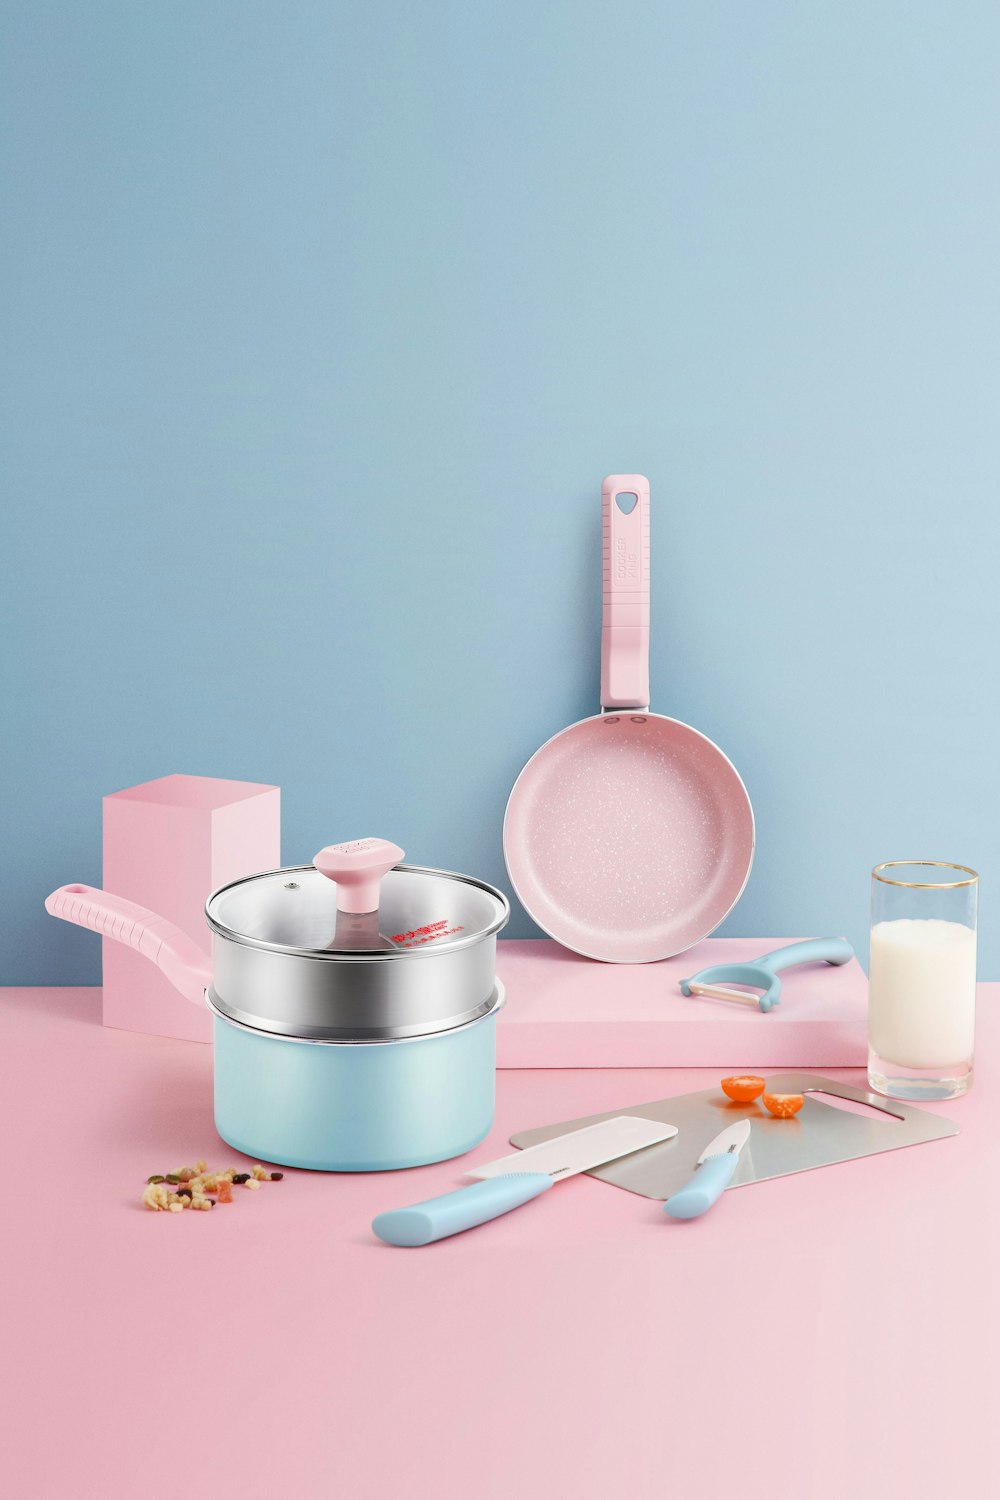 stainless steel cooking pot on pink table